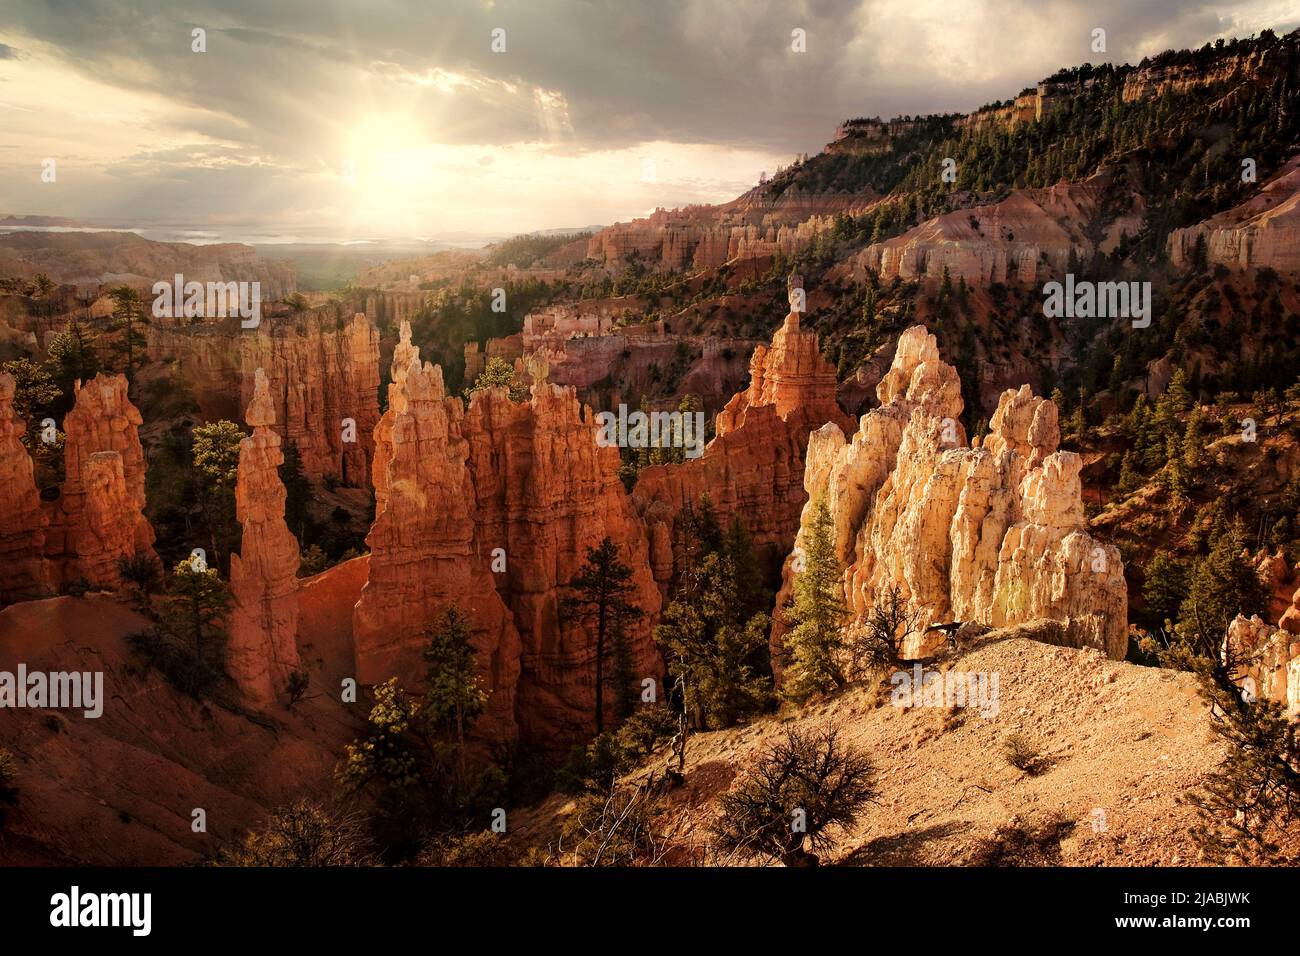 The Hoodoos and rock formations of Bryce Canyon National Park reflect the early morning sunshine in Utah. Stock Photo